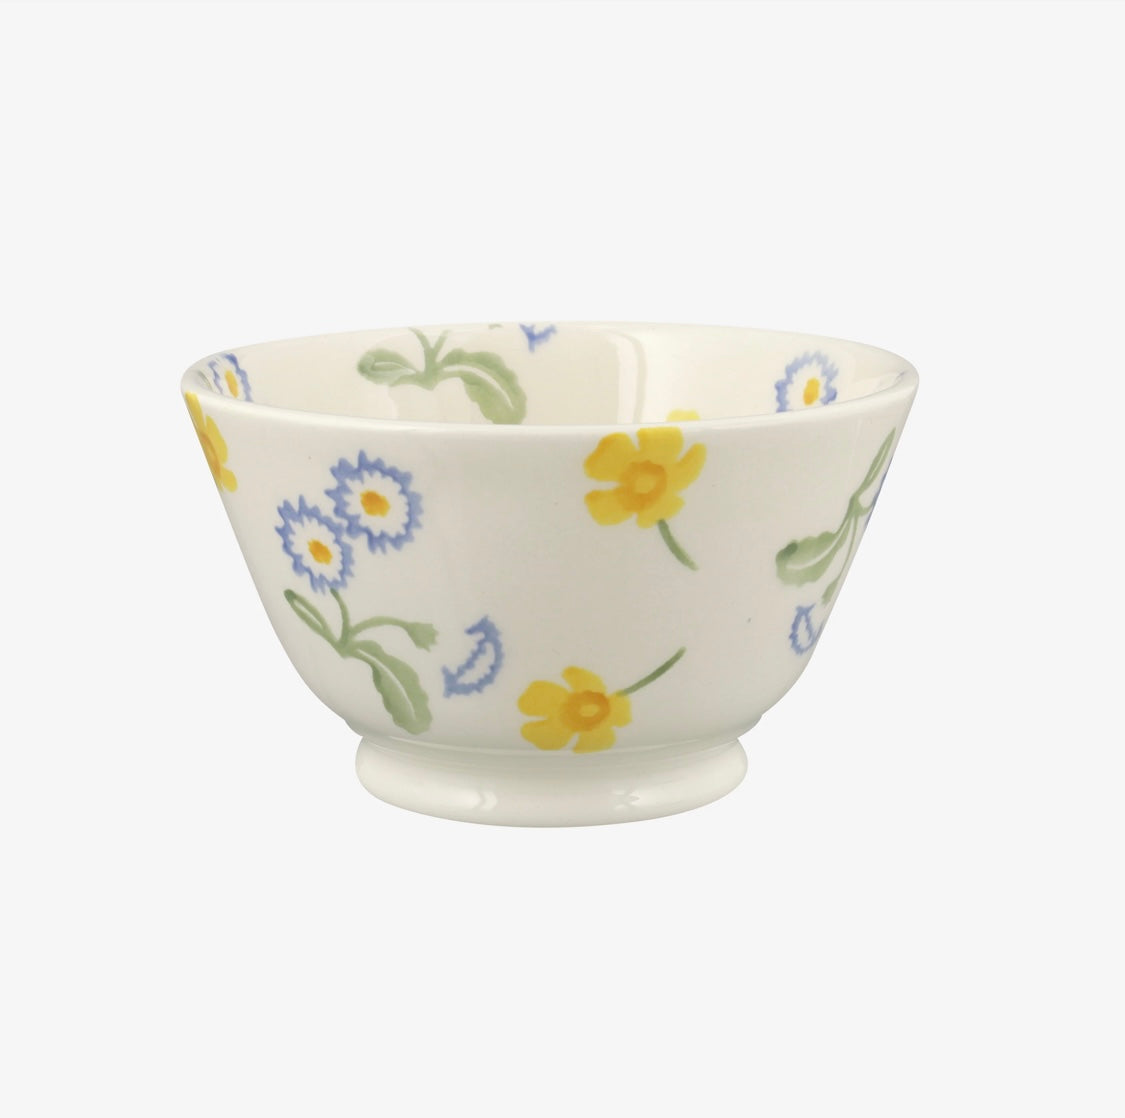 Emma Bridgewater Buttercup & Daisies Small Old Bowl 12.5cm 300ml